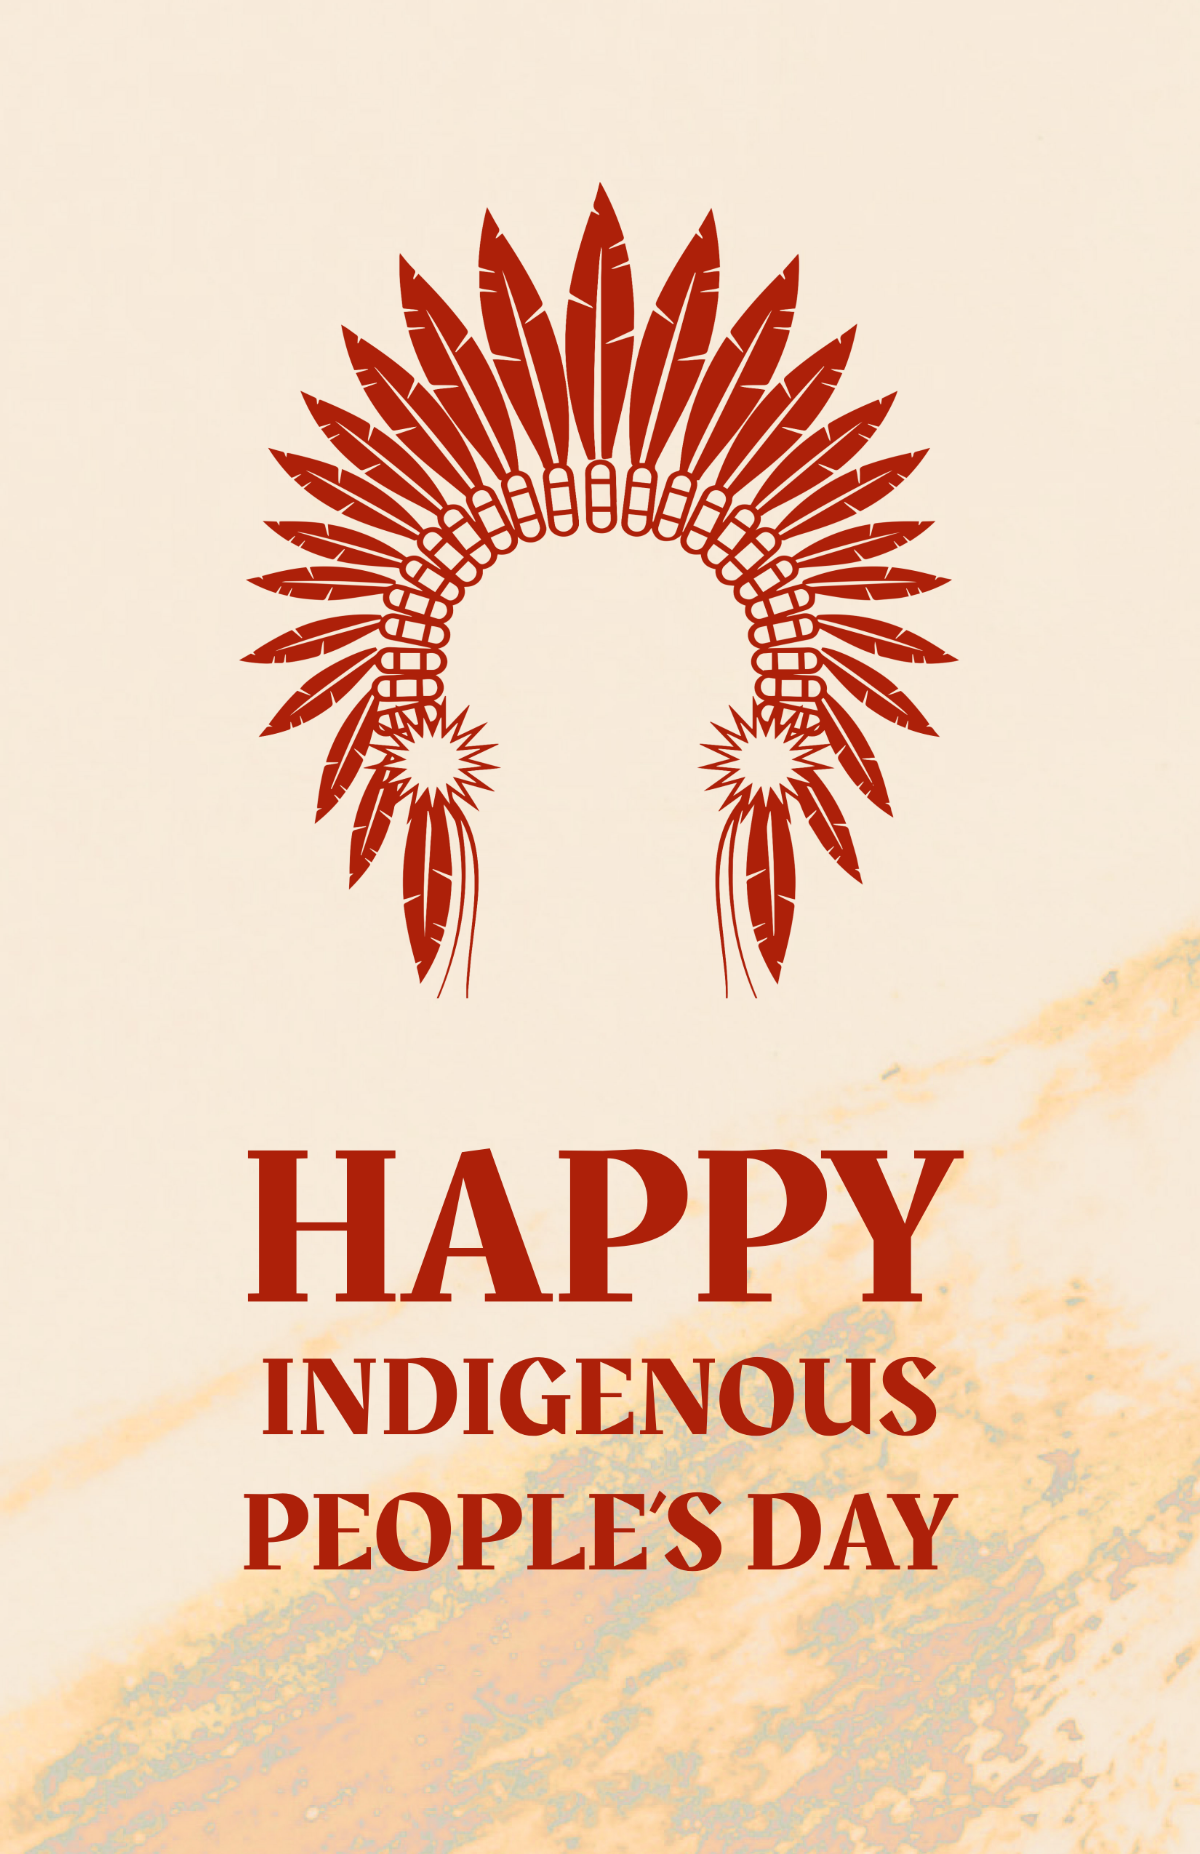 Indigenous Peoples' Day Poster Template - Edit Online & Download ...